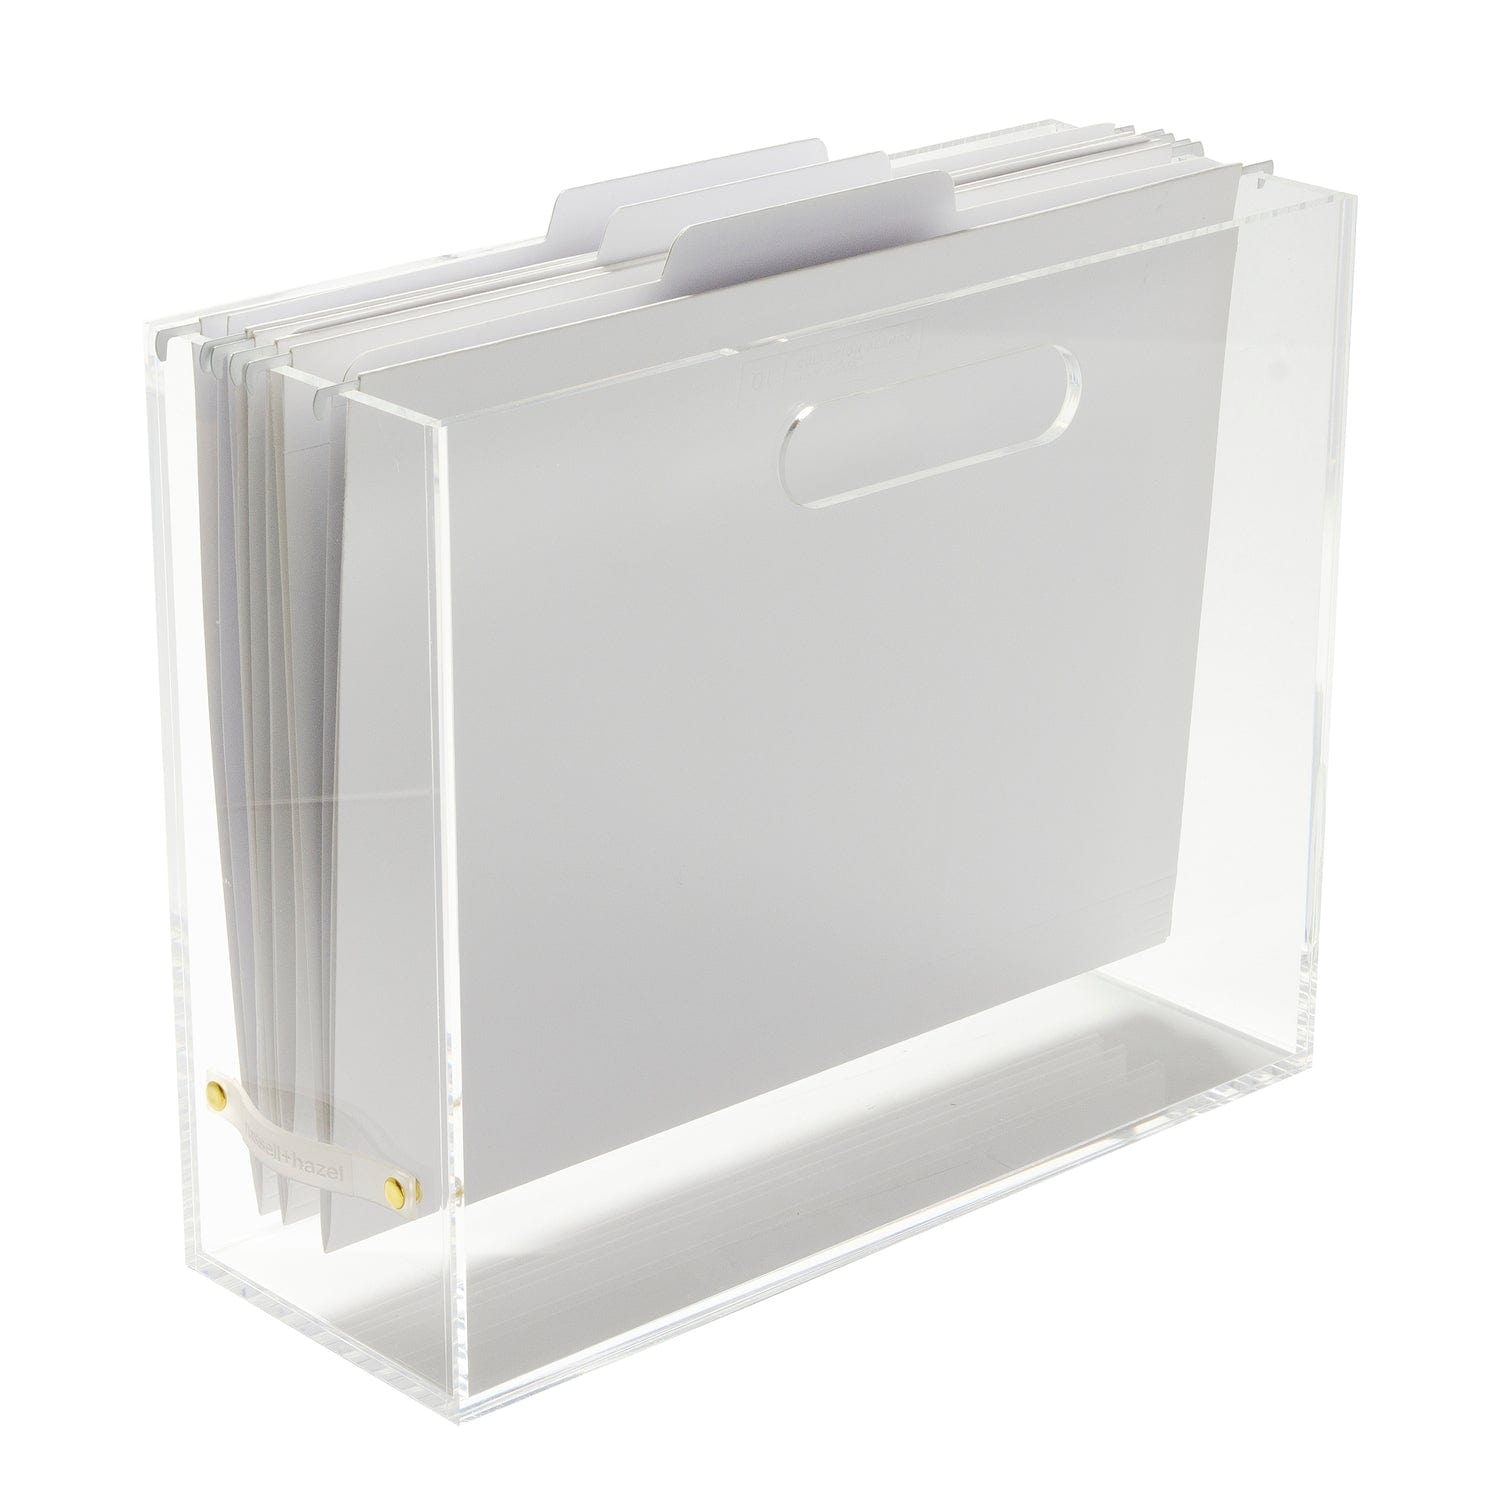 Thyle 2 Pieces Acrylic File Box File Organizer Box with Side Handles Clear  File Box Portable File Crate Storage Box Magazine Holder for A4 Letter Home